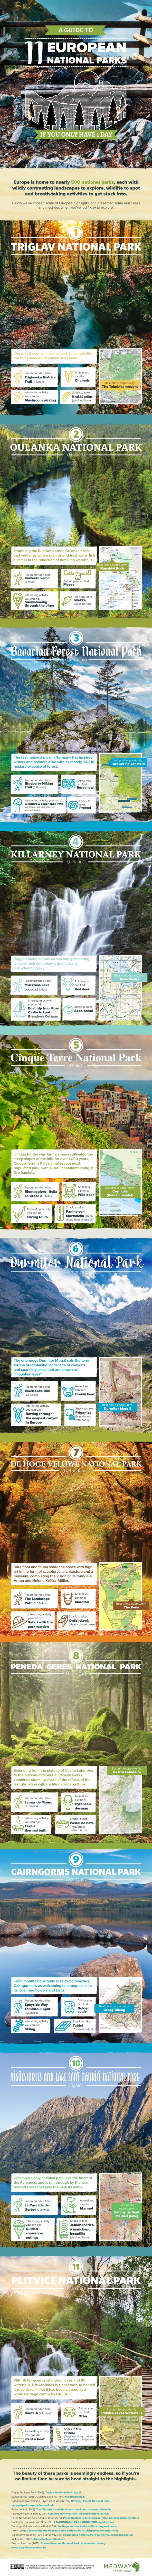 A Guide to 11 European National Parks